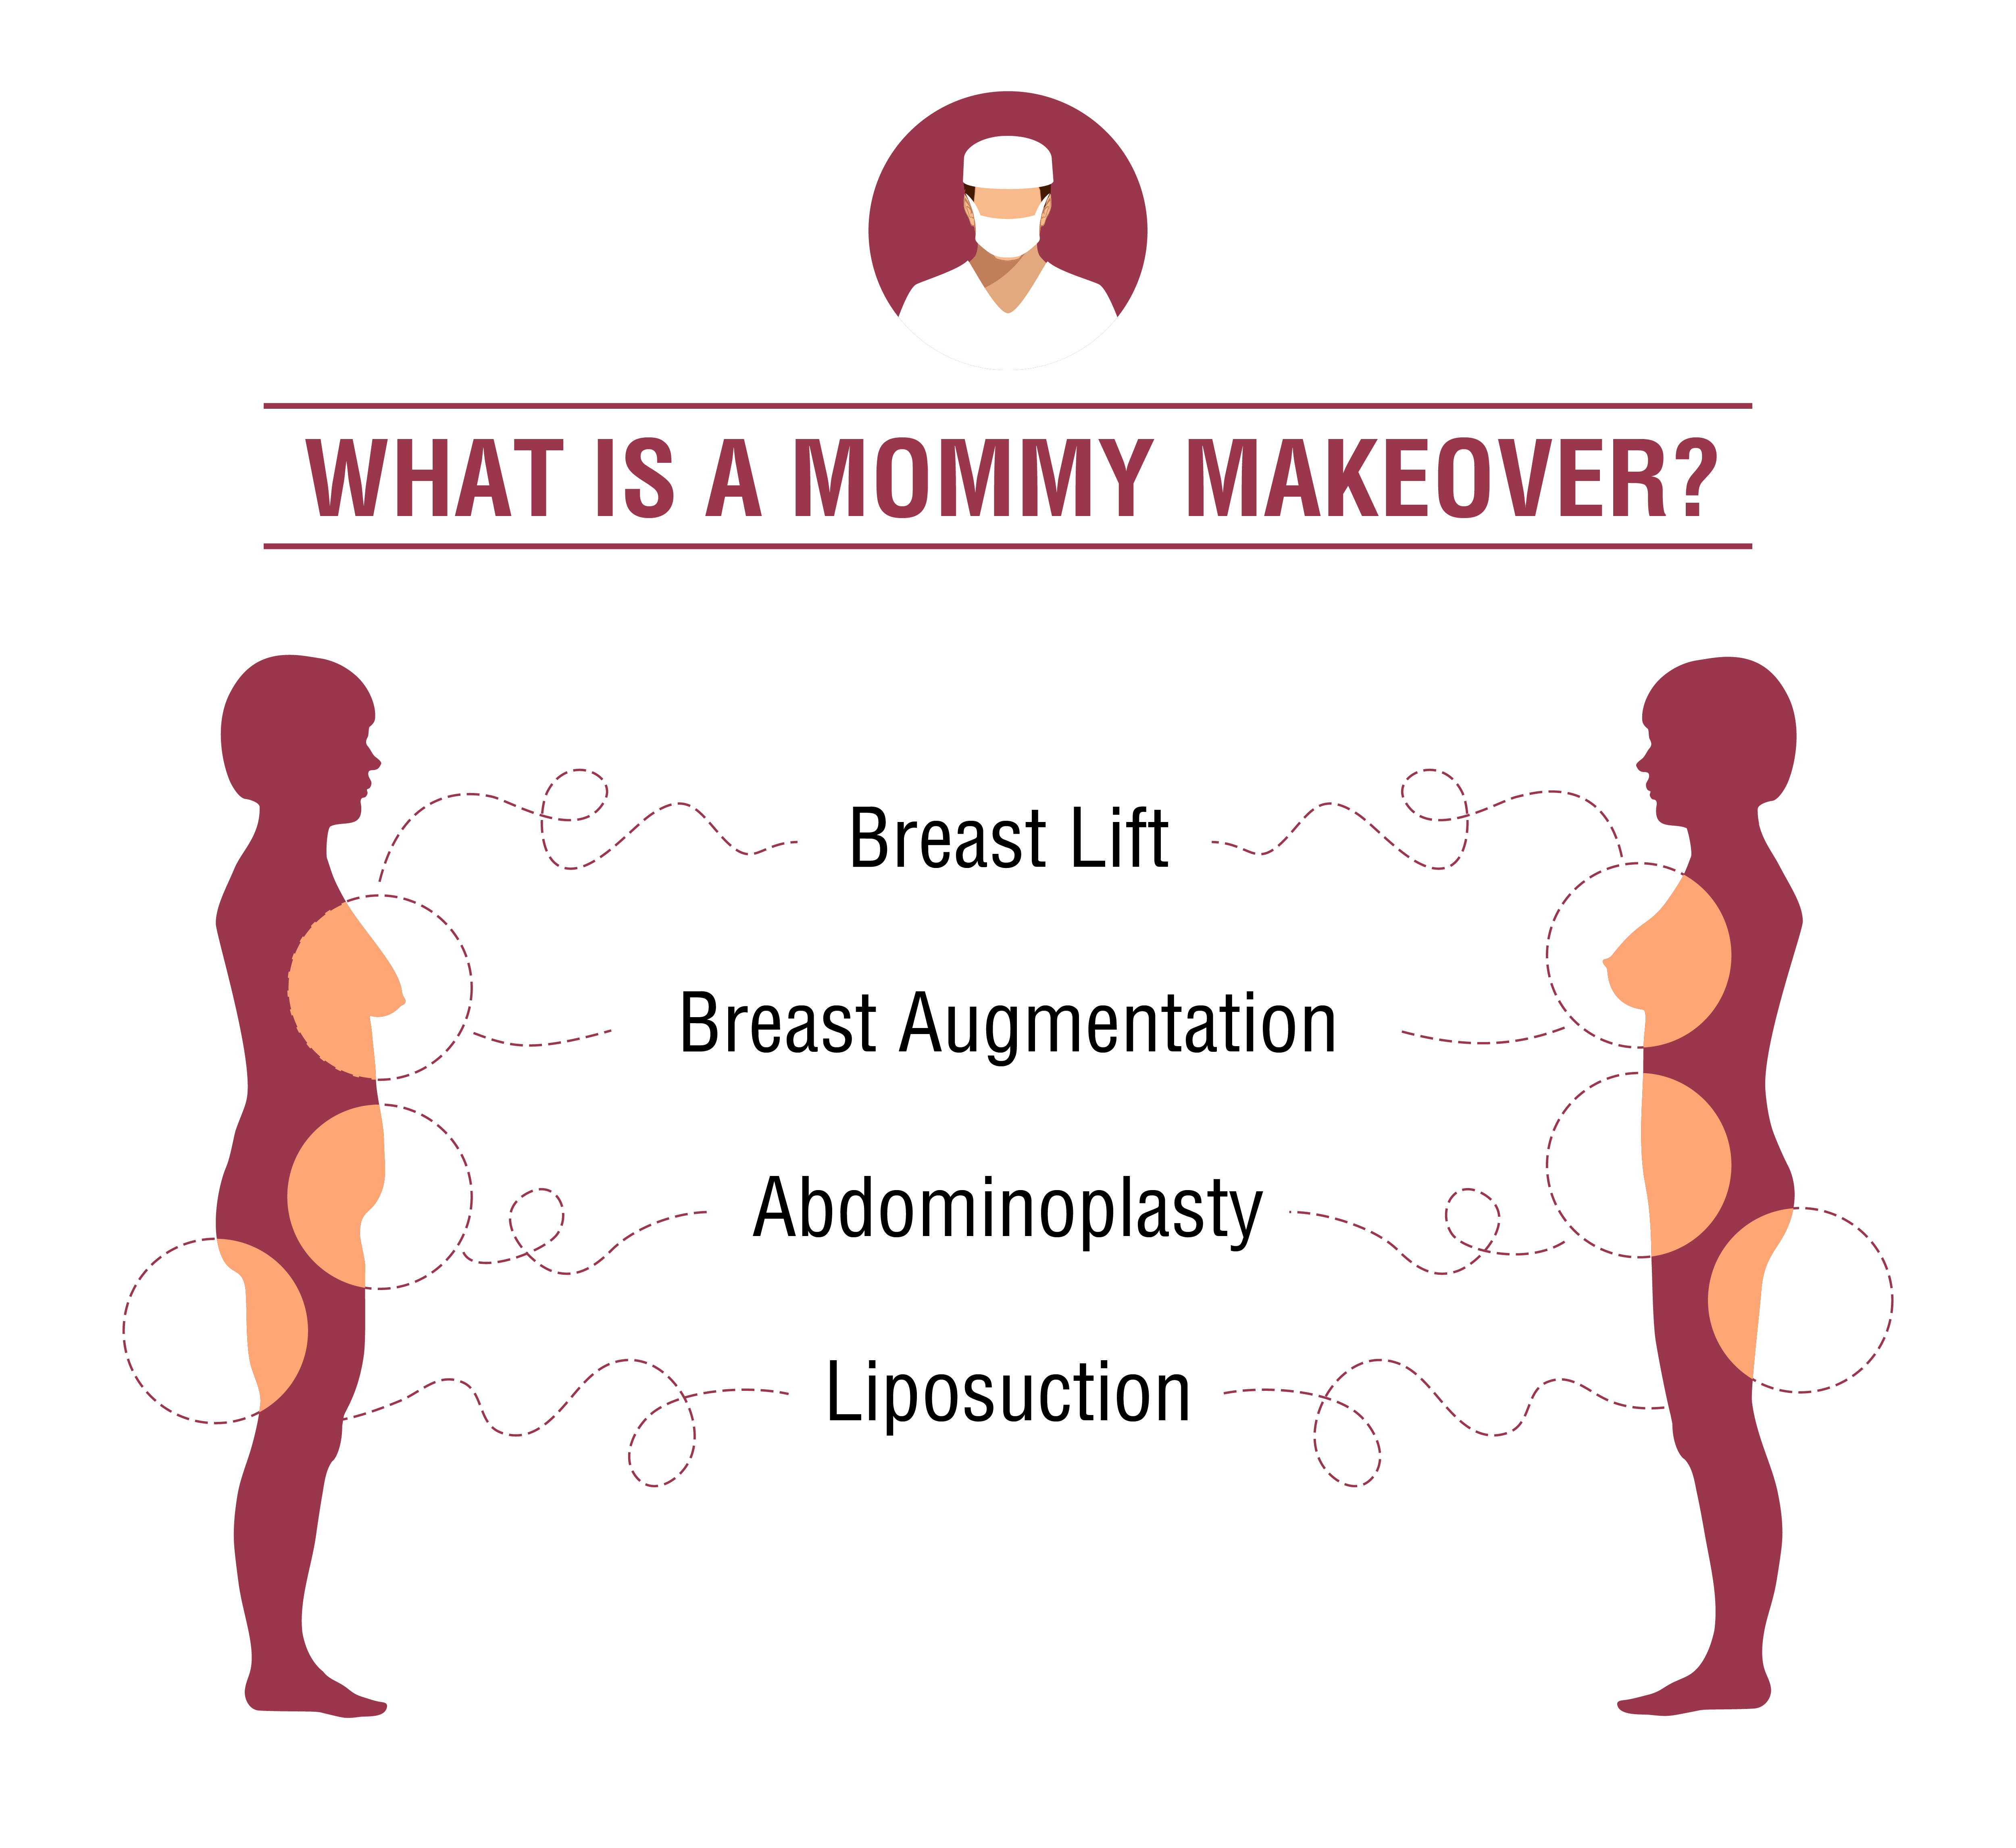 Mommy makeover infographic 